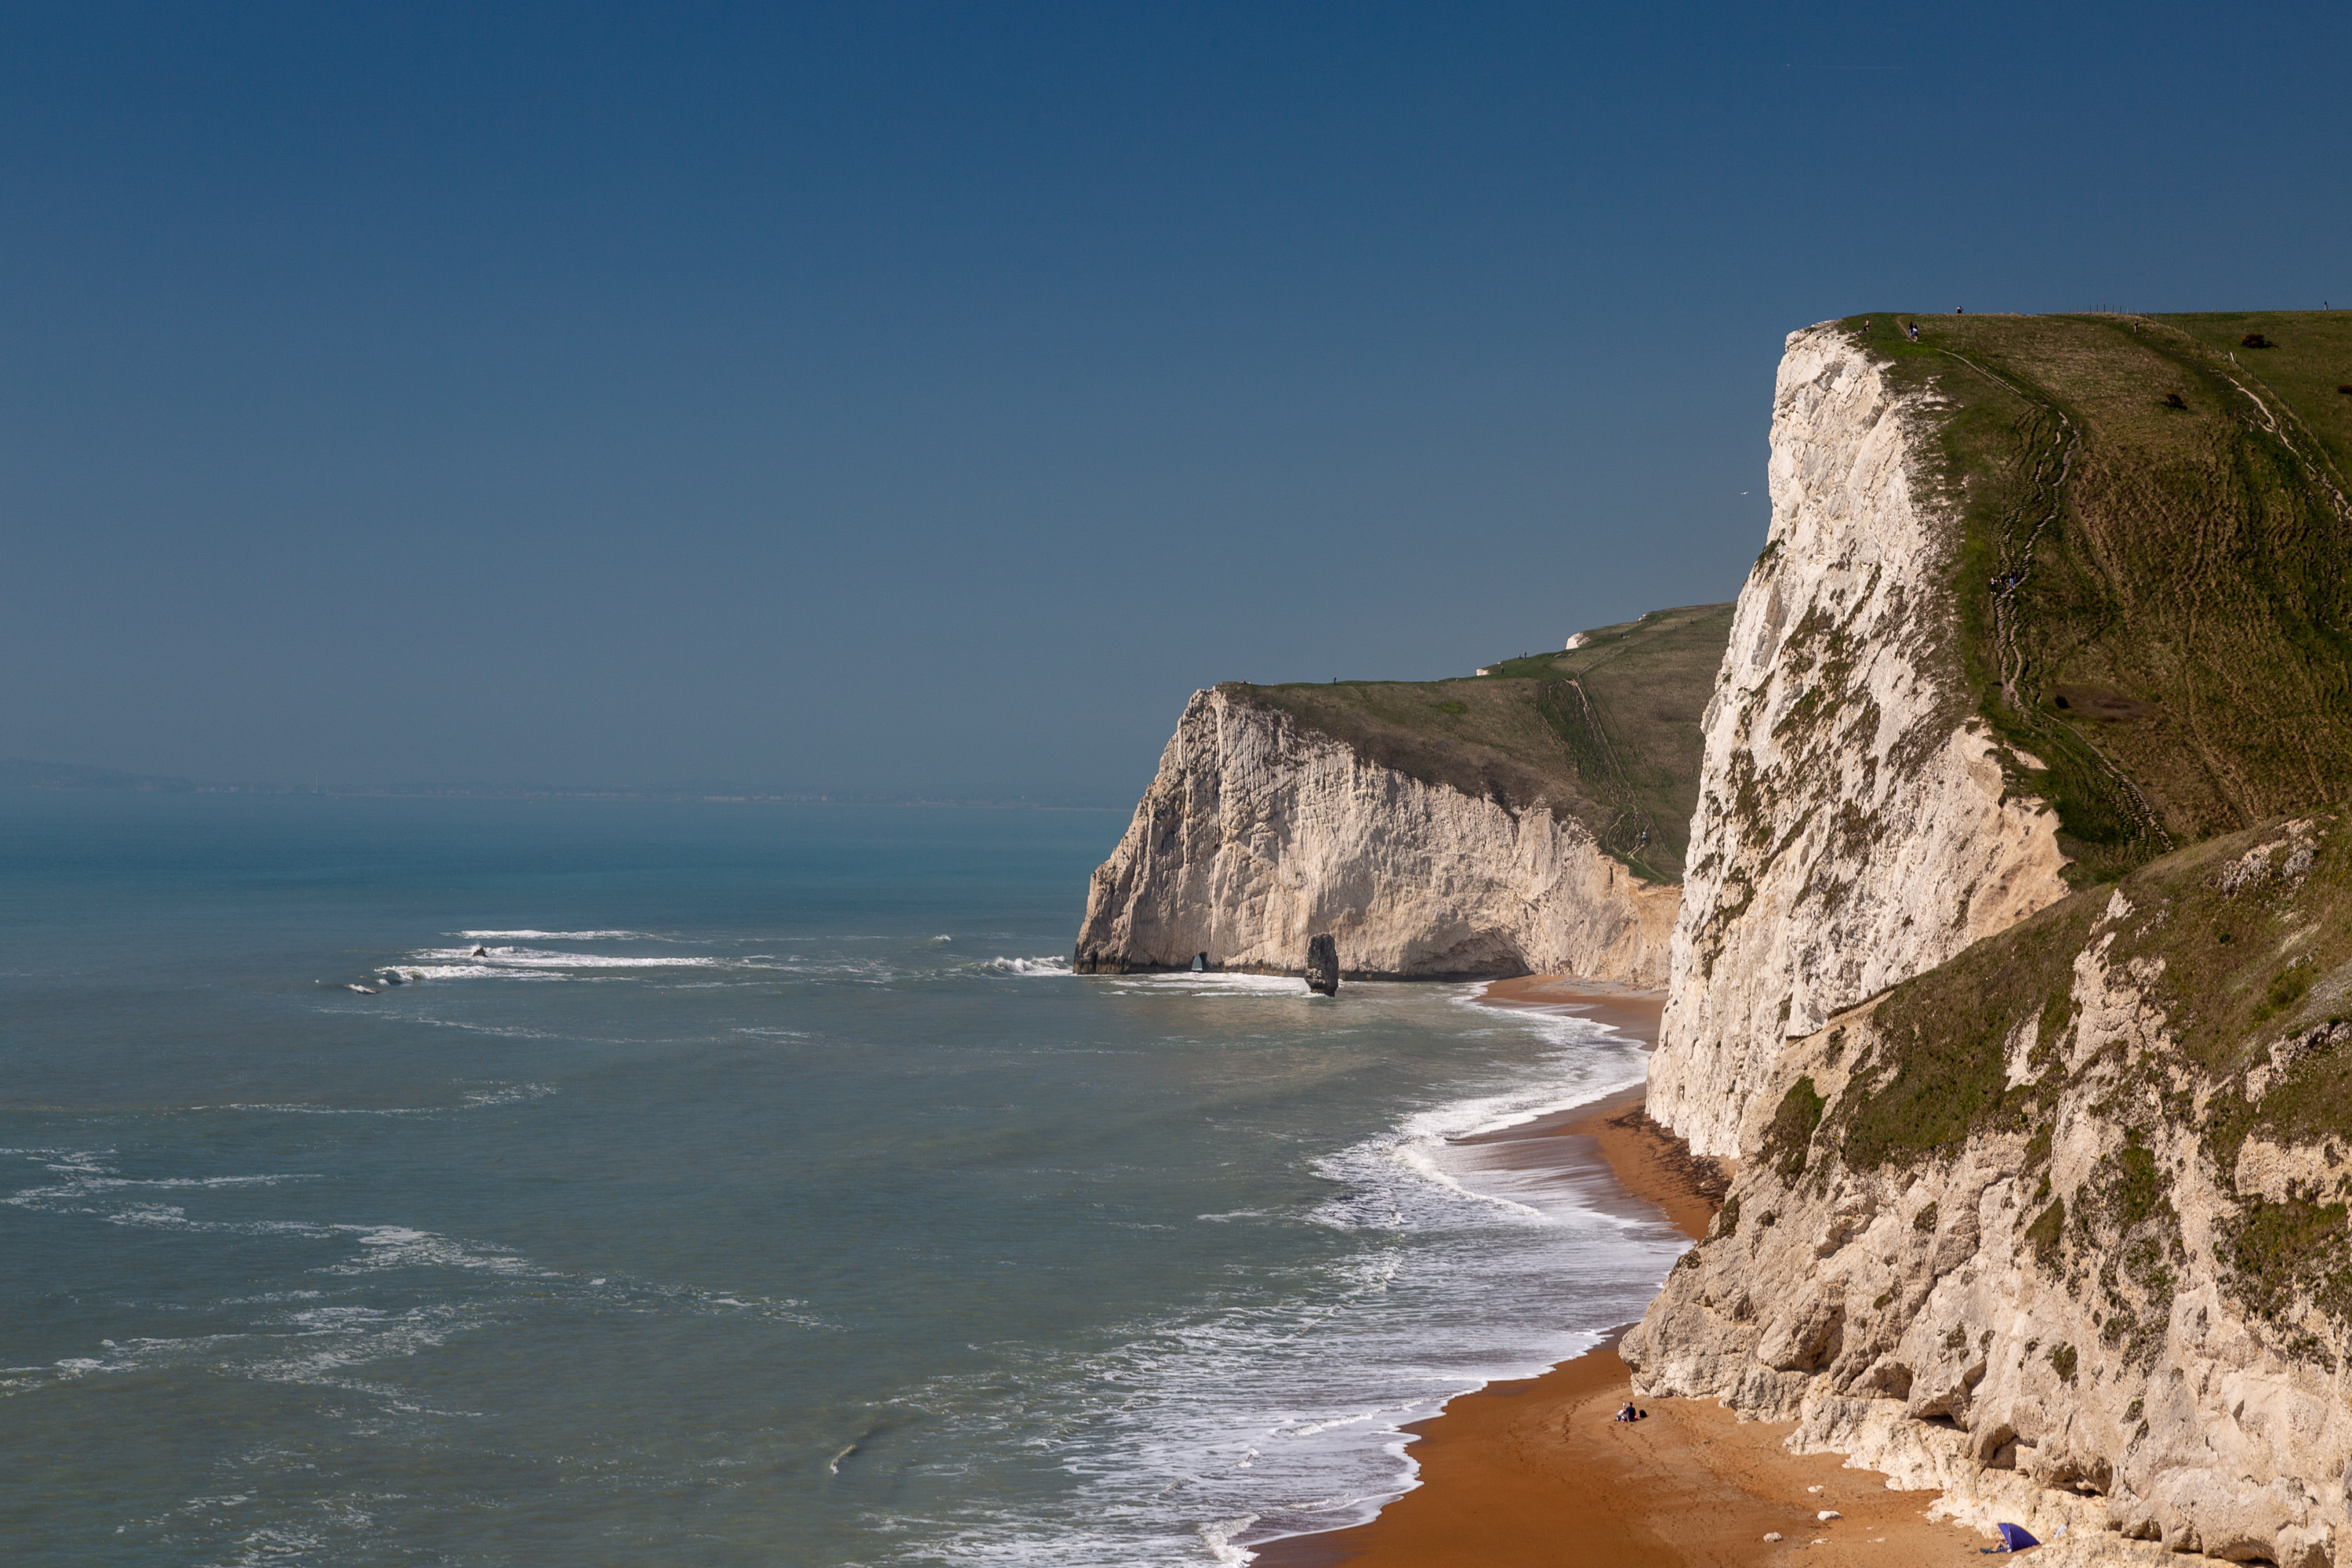 View of the white cliffs at Swyre Head and Bat's Head near Durdle Door, Dorset.